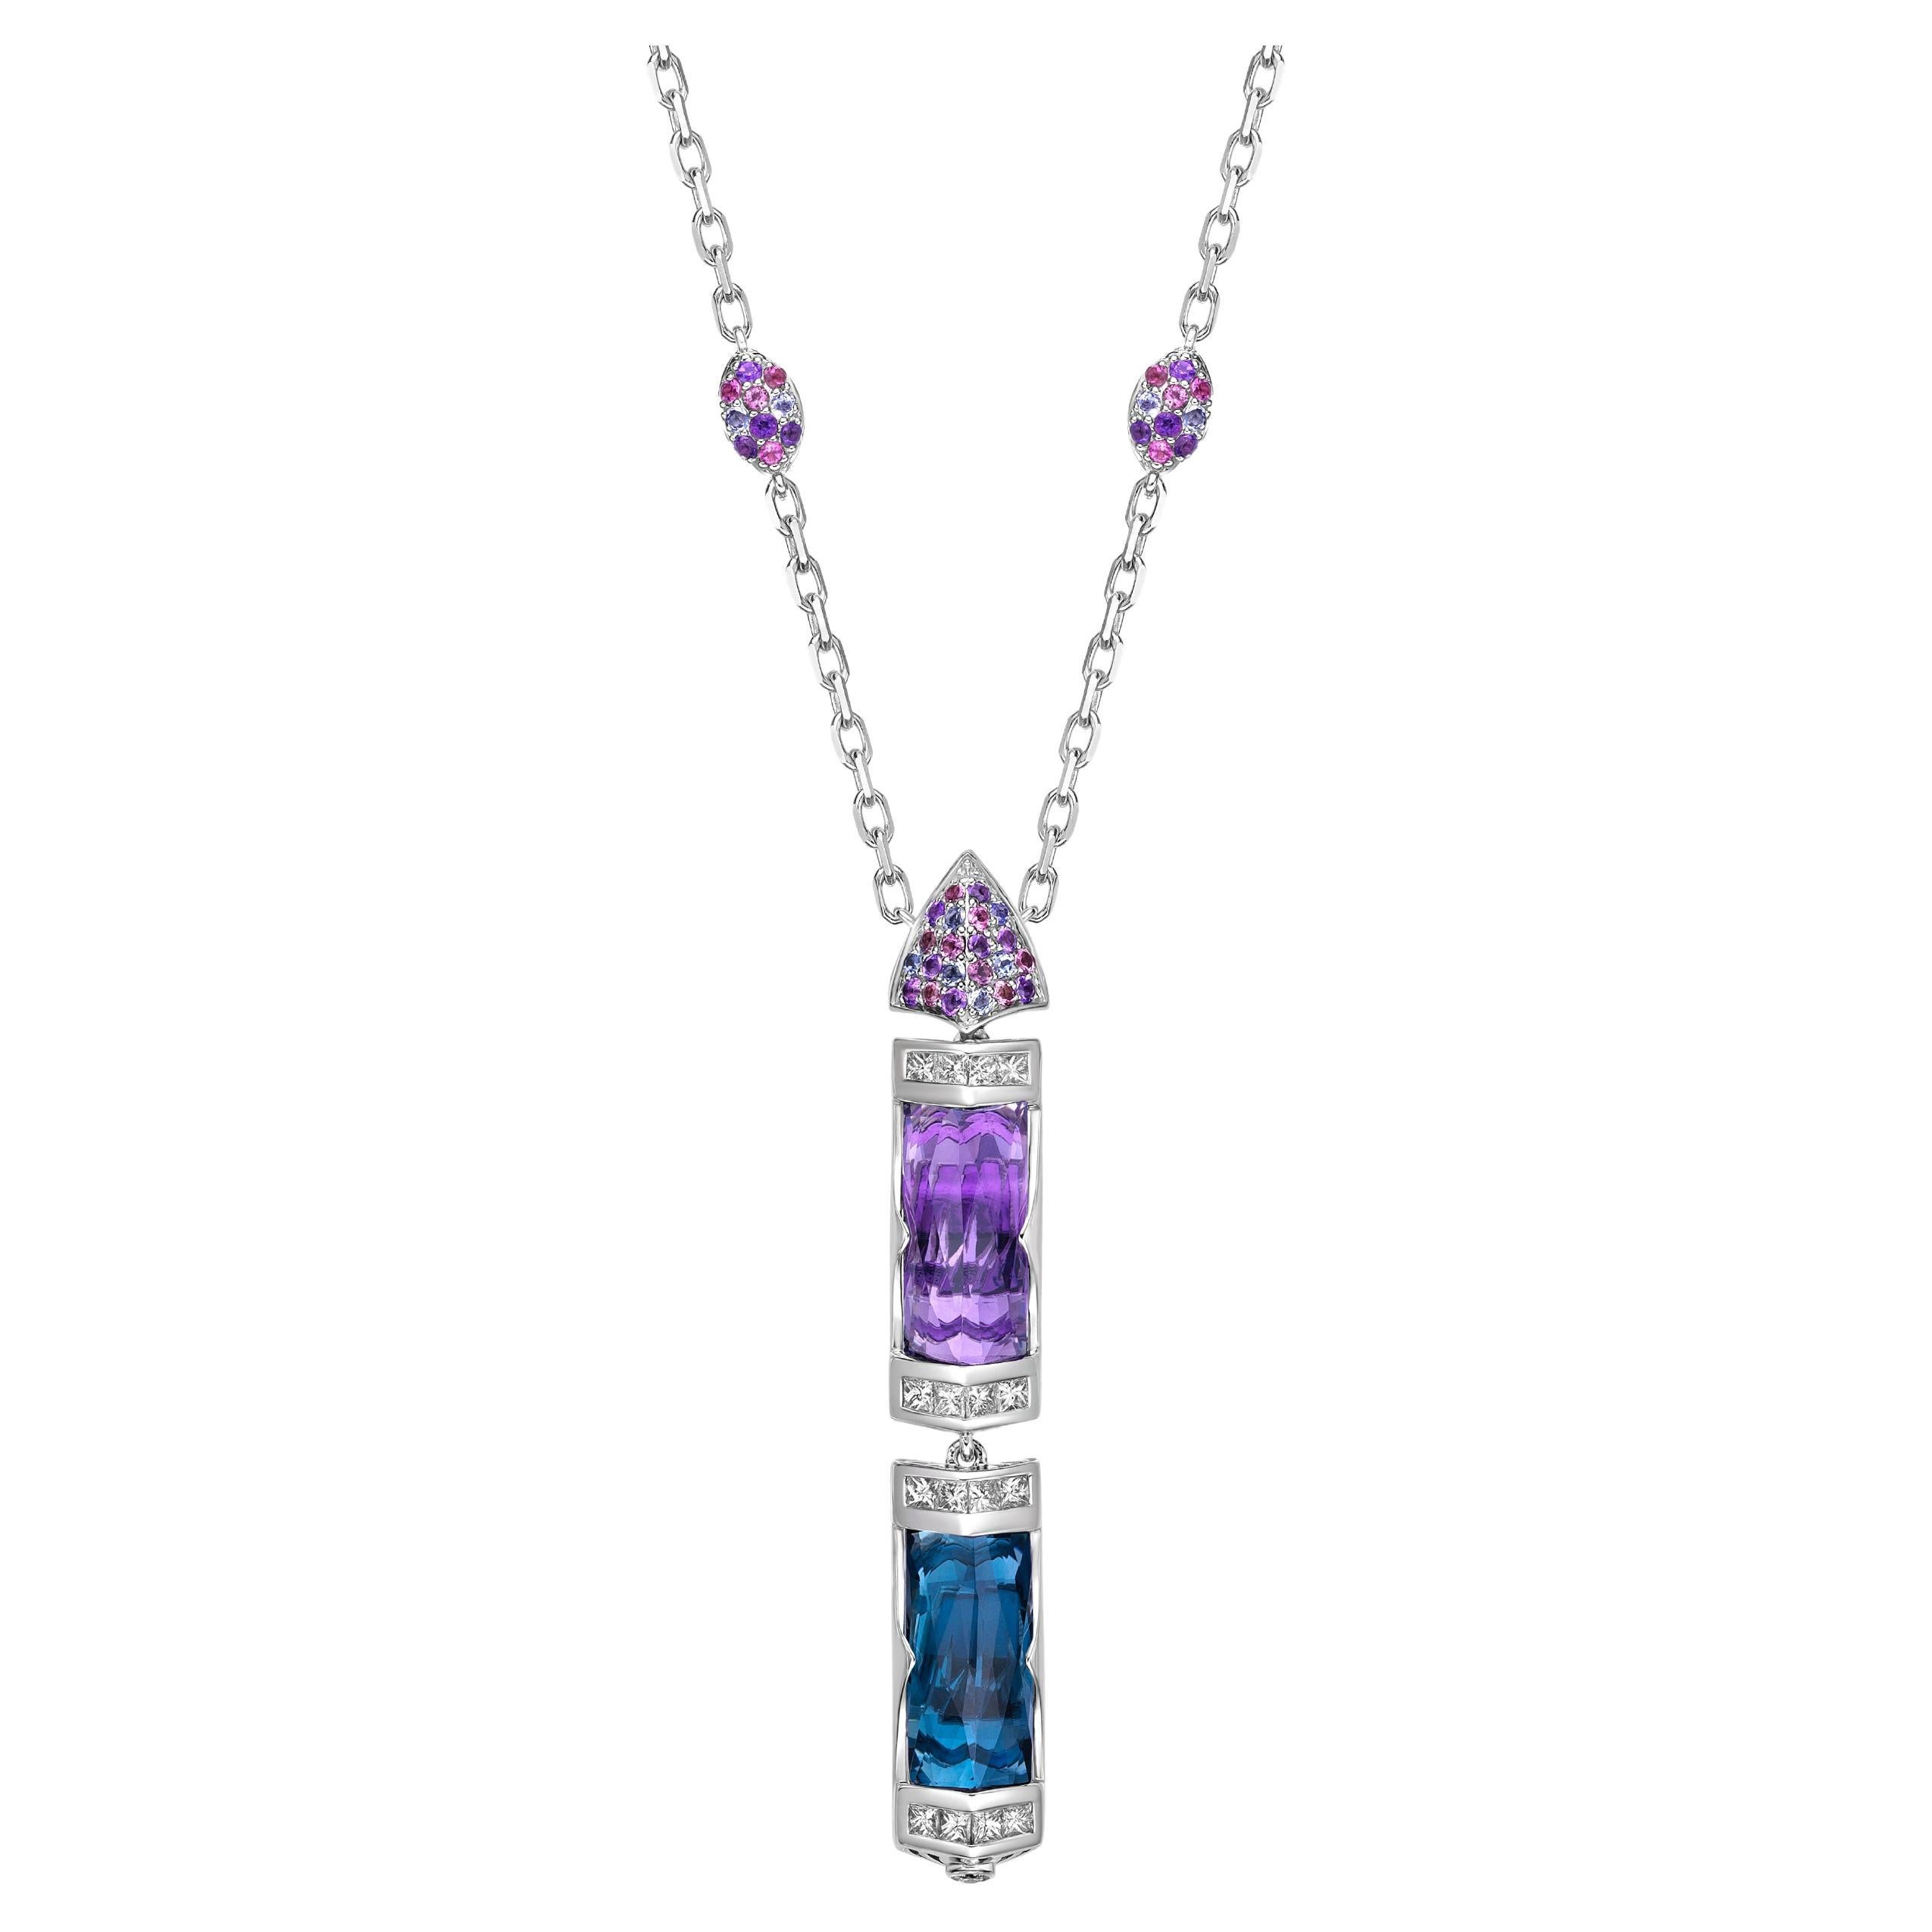 13.18 Carat Blue topaz, Amethyst Pendant in 18Karat White Gold with Multi Stone. For Sale